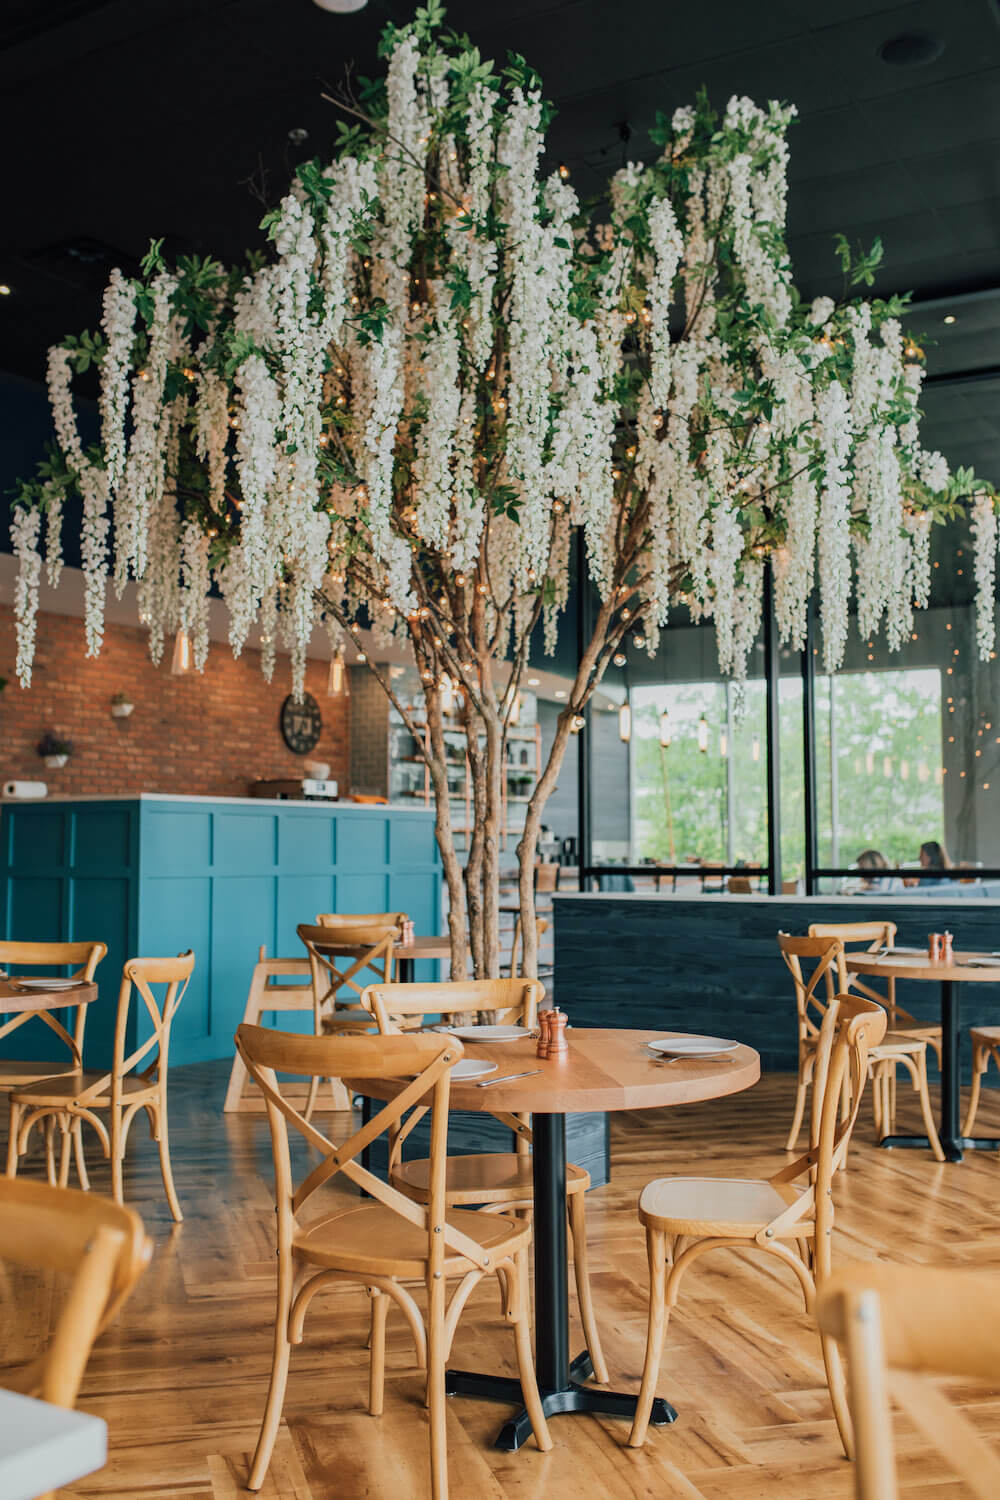 Artificial Wisteria Tree amongst tables and chairs in New Jersey Restaurant